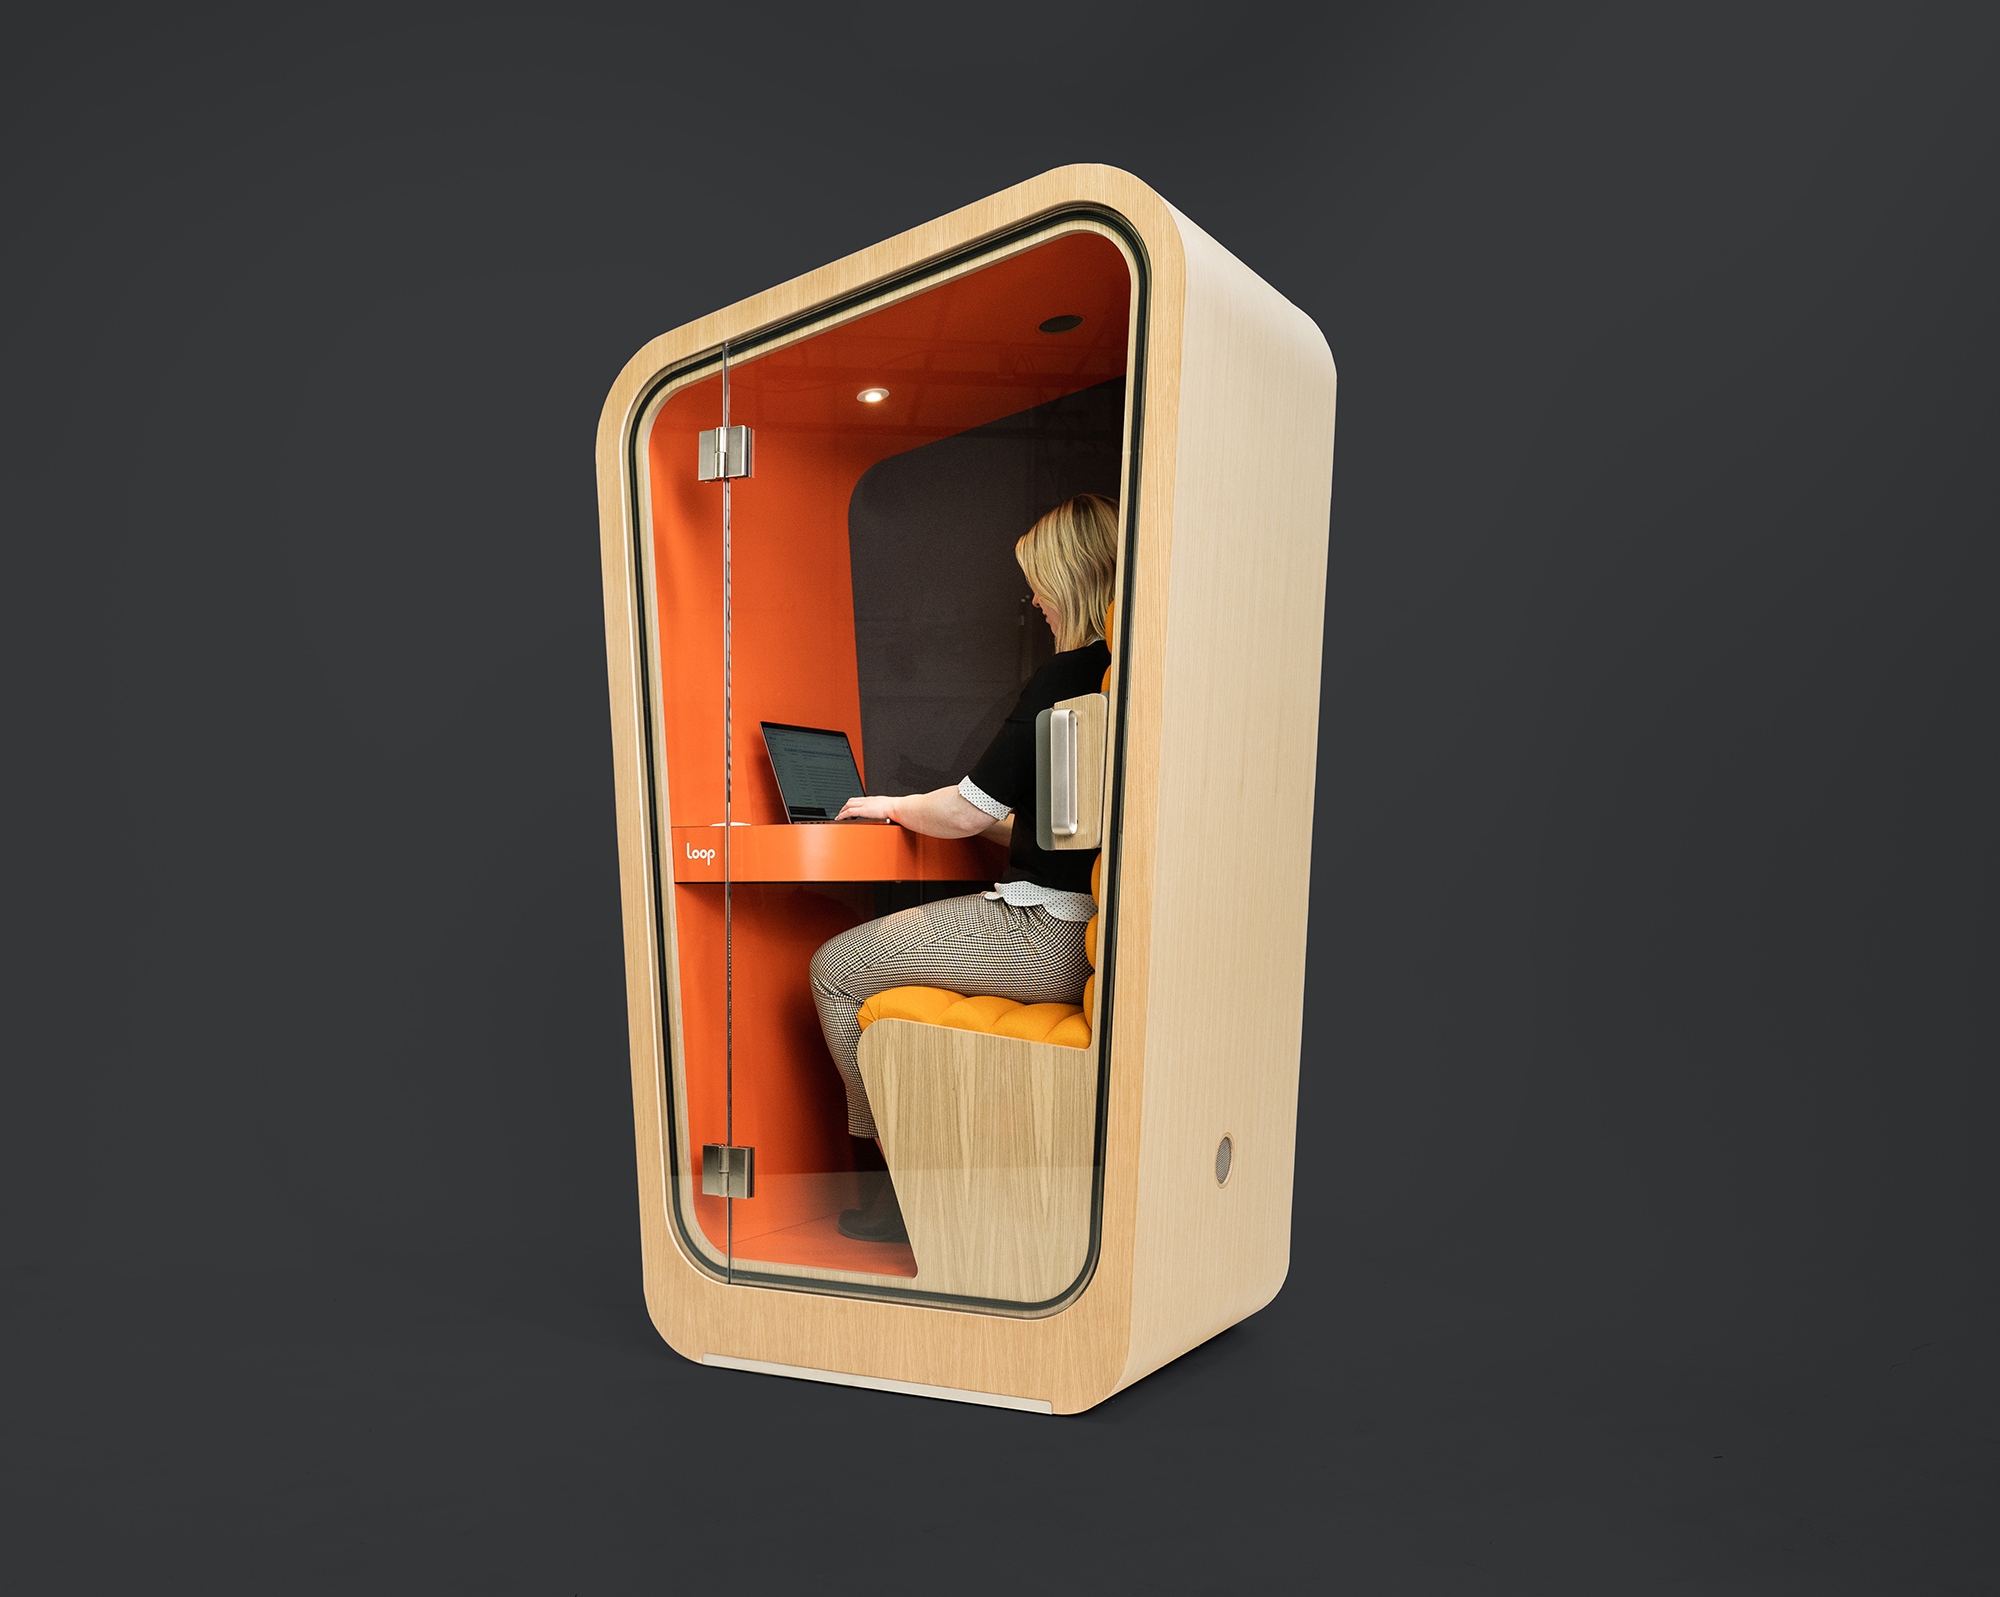 Sustainable wood, high end, luxury phone booth and office pod design